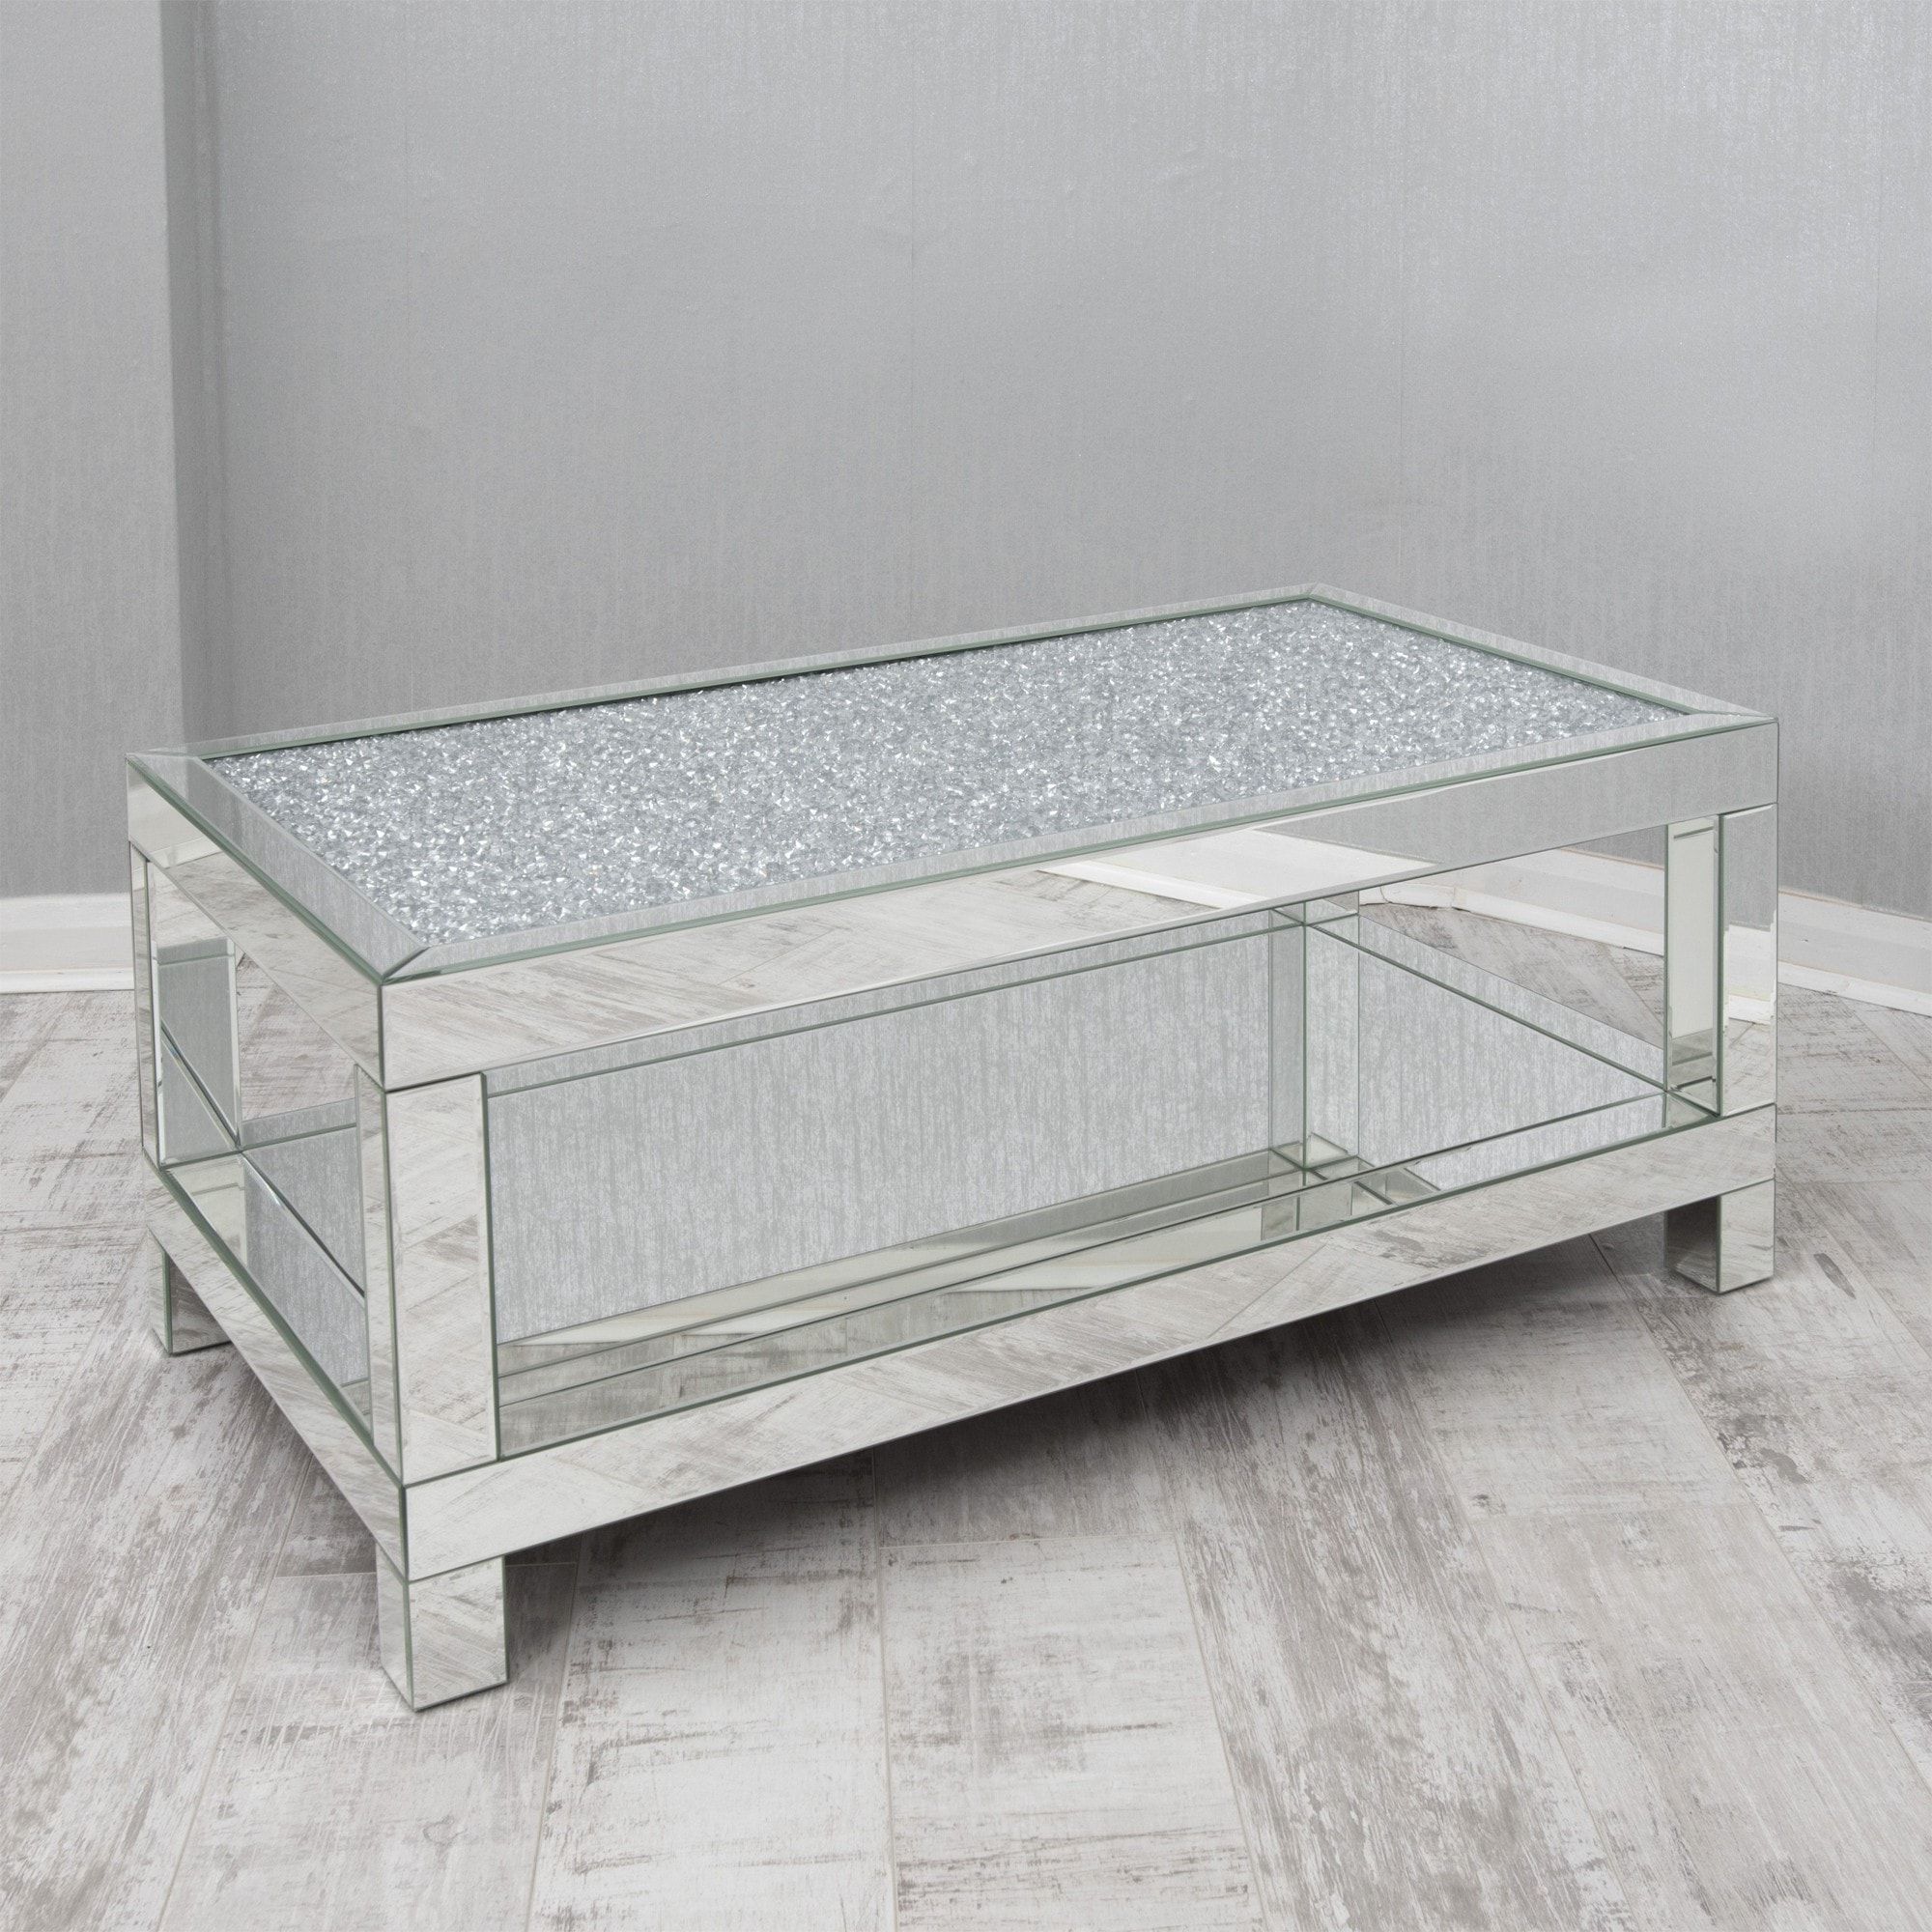 Mirrored Coffee Table (View 8 of 10)